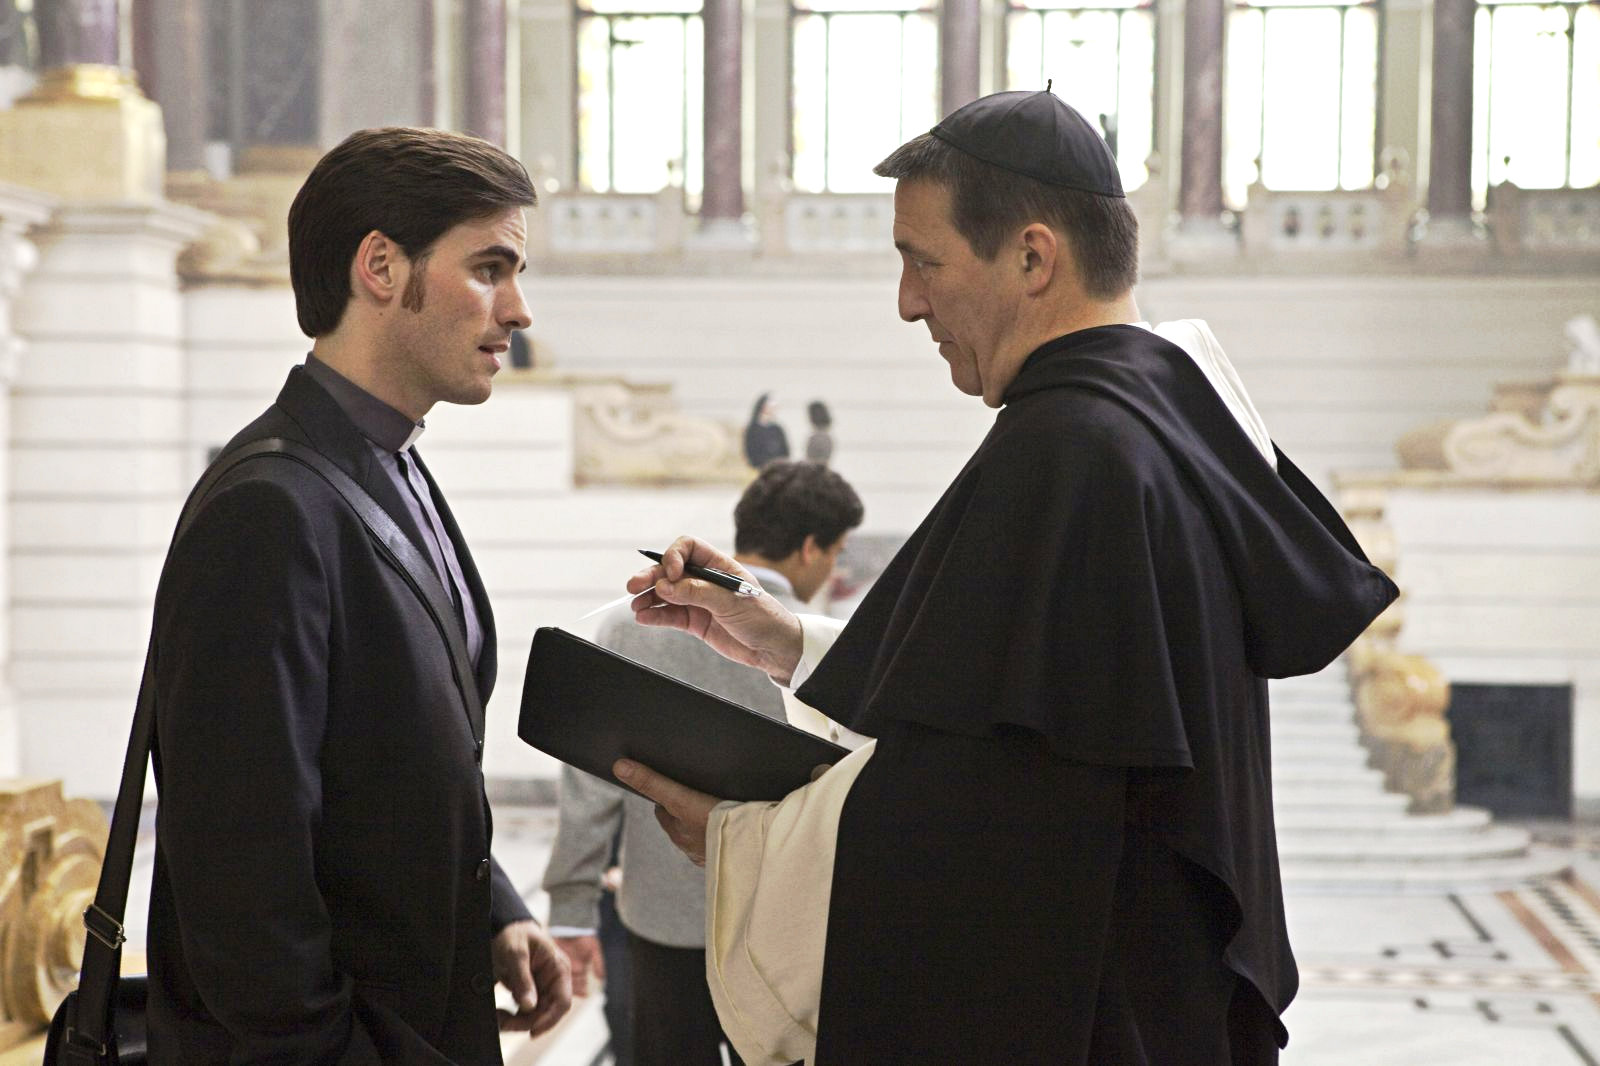 Colin O'Donoghue stars as Michael Kovak and Ciaran Hinds stars as Father Xavier in Warner Bros. Pictures' The Rite (2011). Photo credit by Egon Endrenyi.